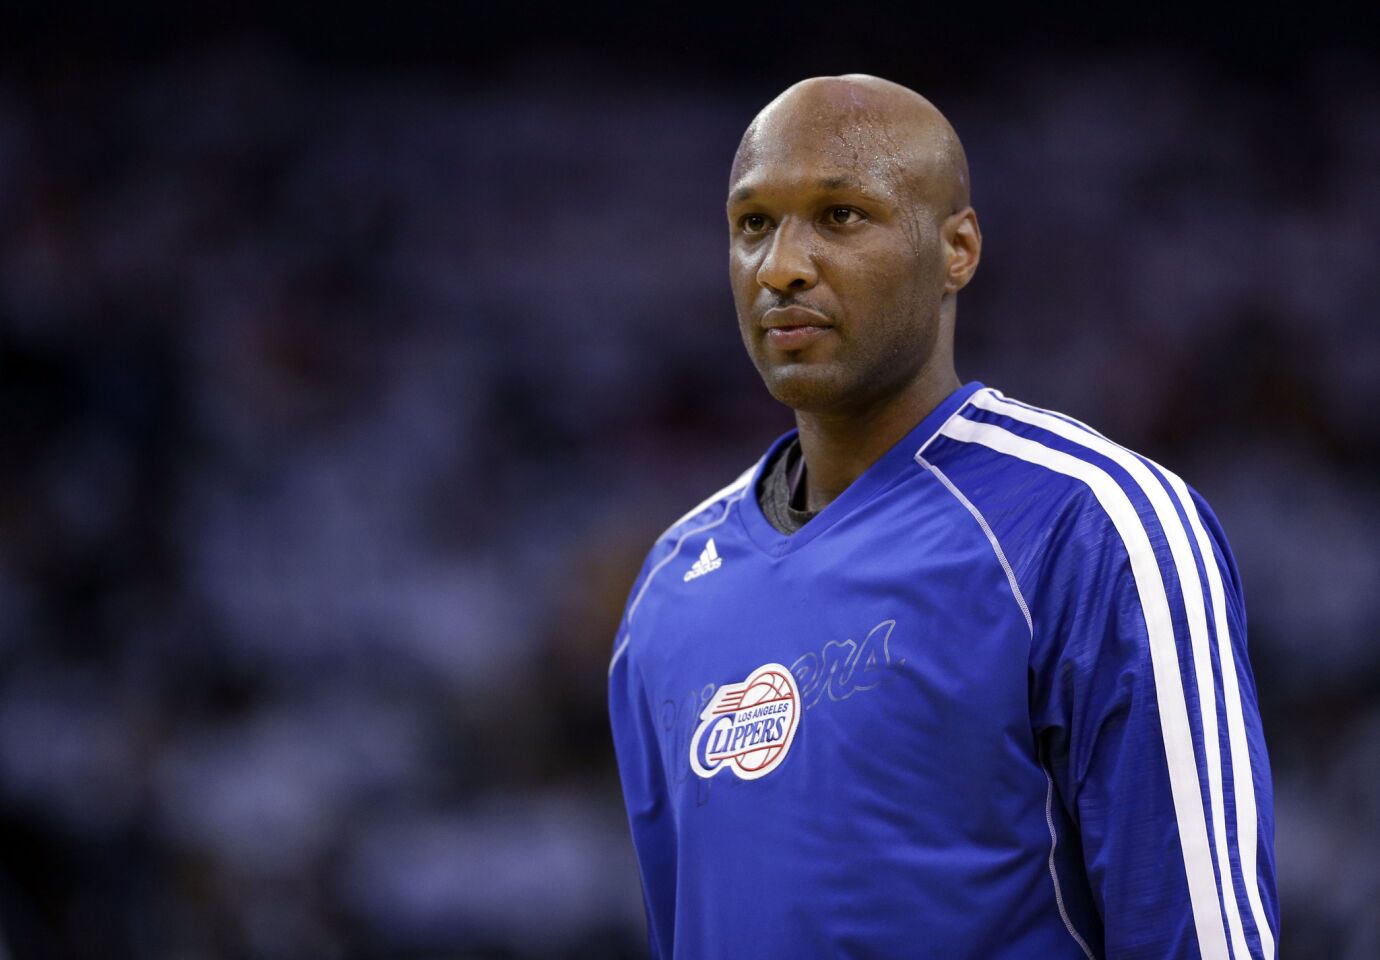 Clippers star Lamar Odom plays against the Golden State Warriors on Jan. 2, 2013, in Oakland.